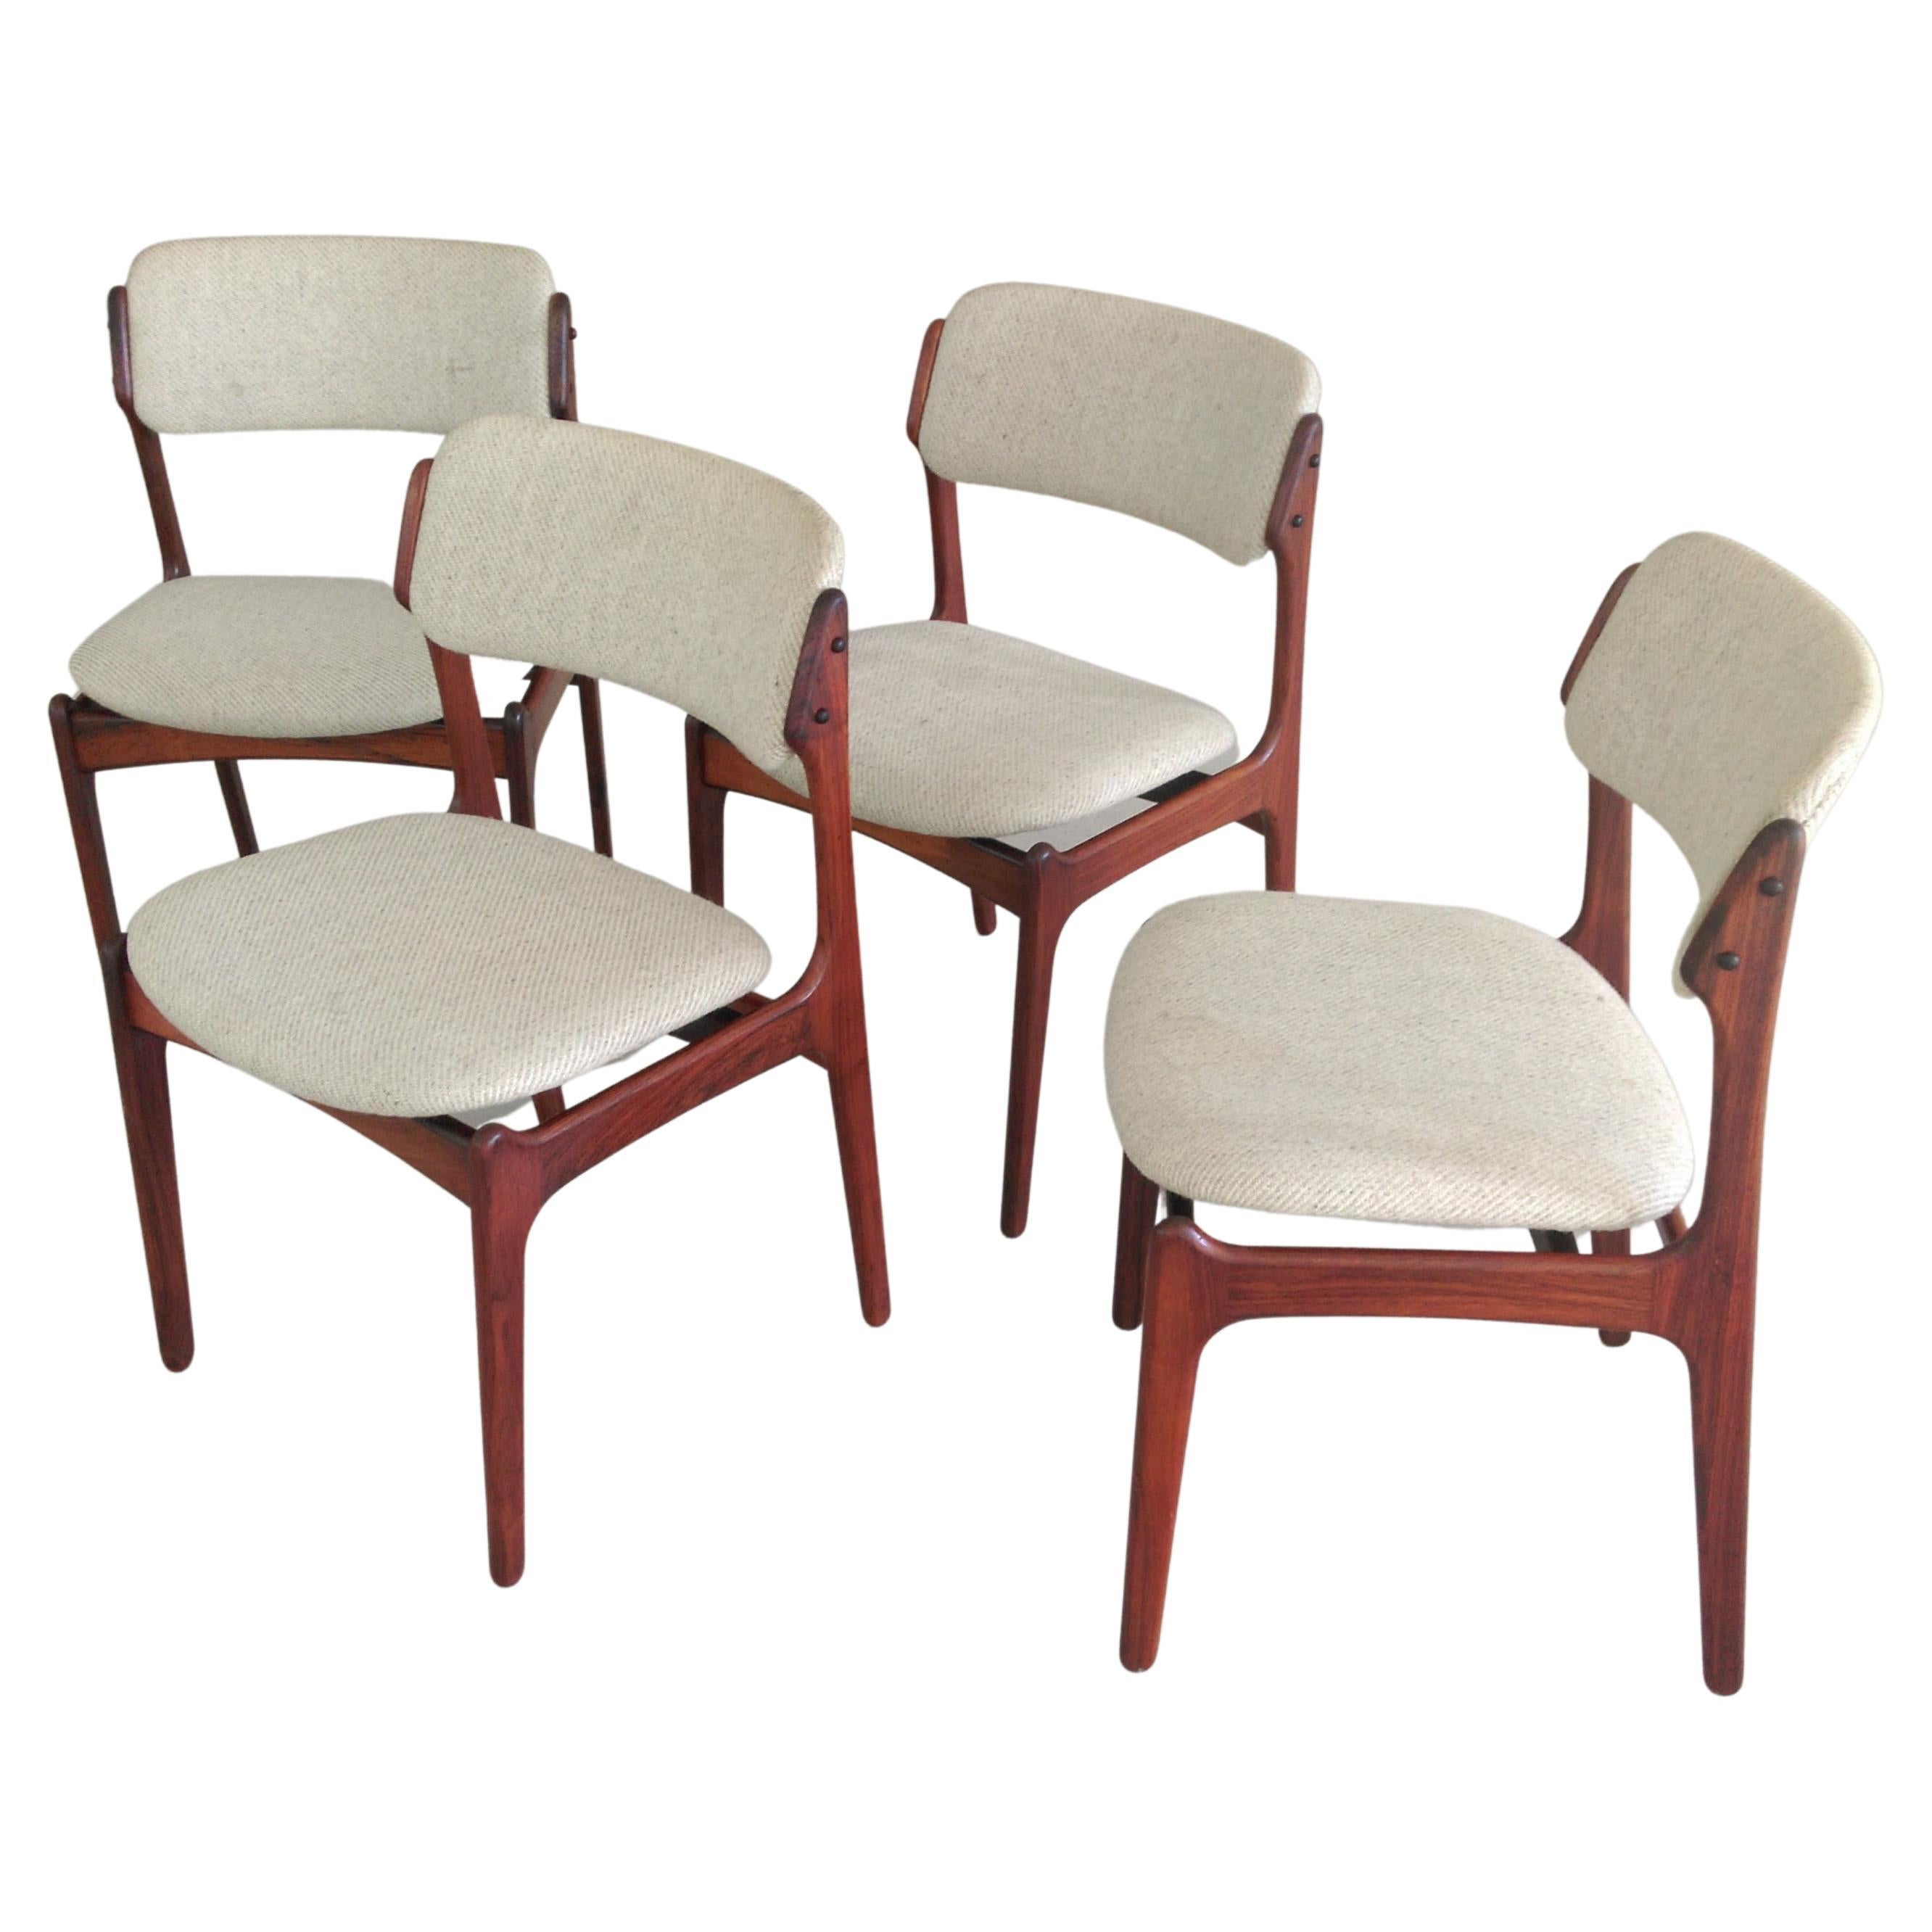 Four Restored Erik Buch Rosewood Dining Chairs, Custom Reupholstery Included